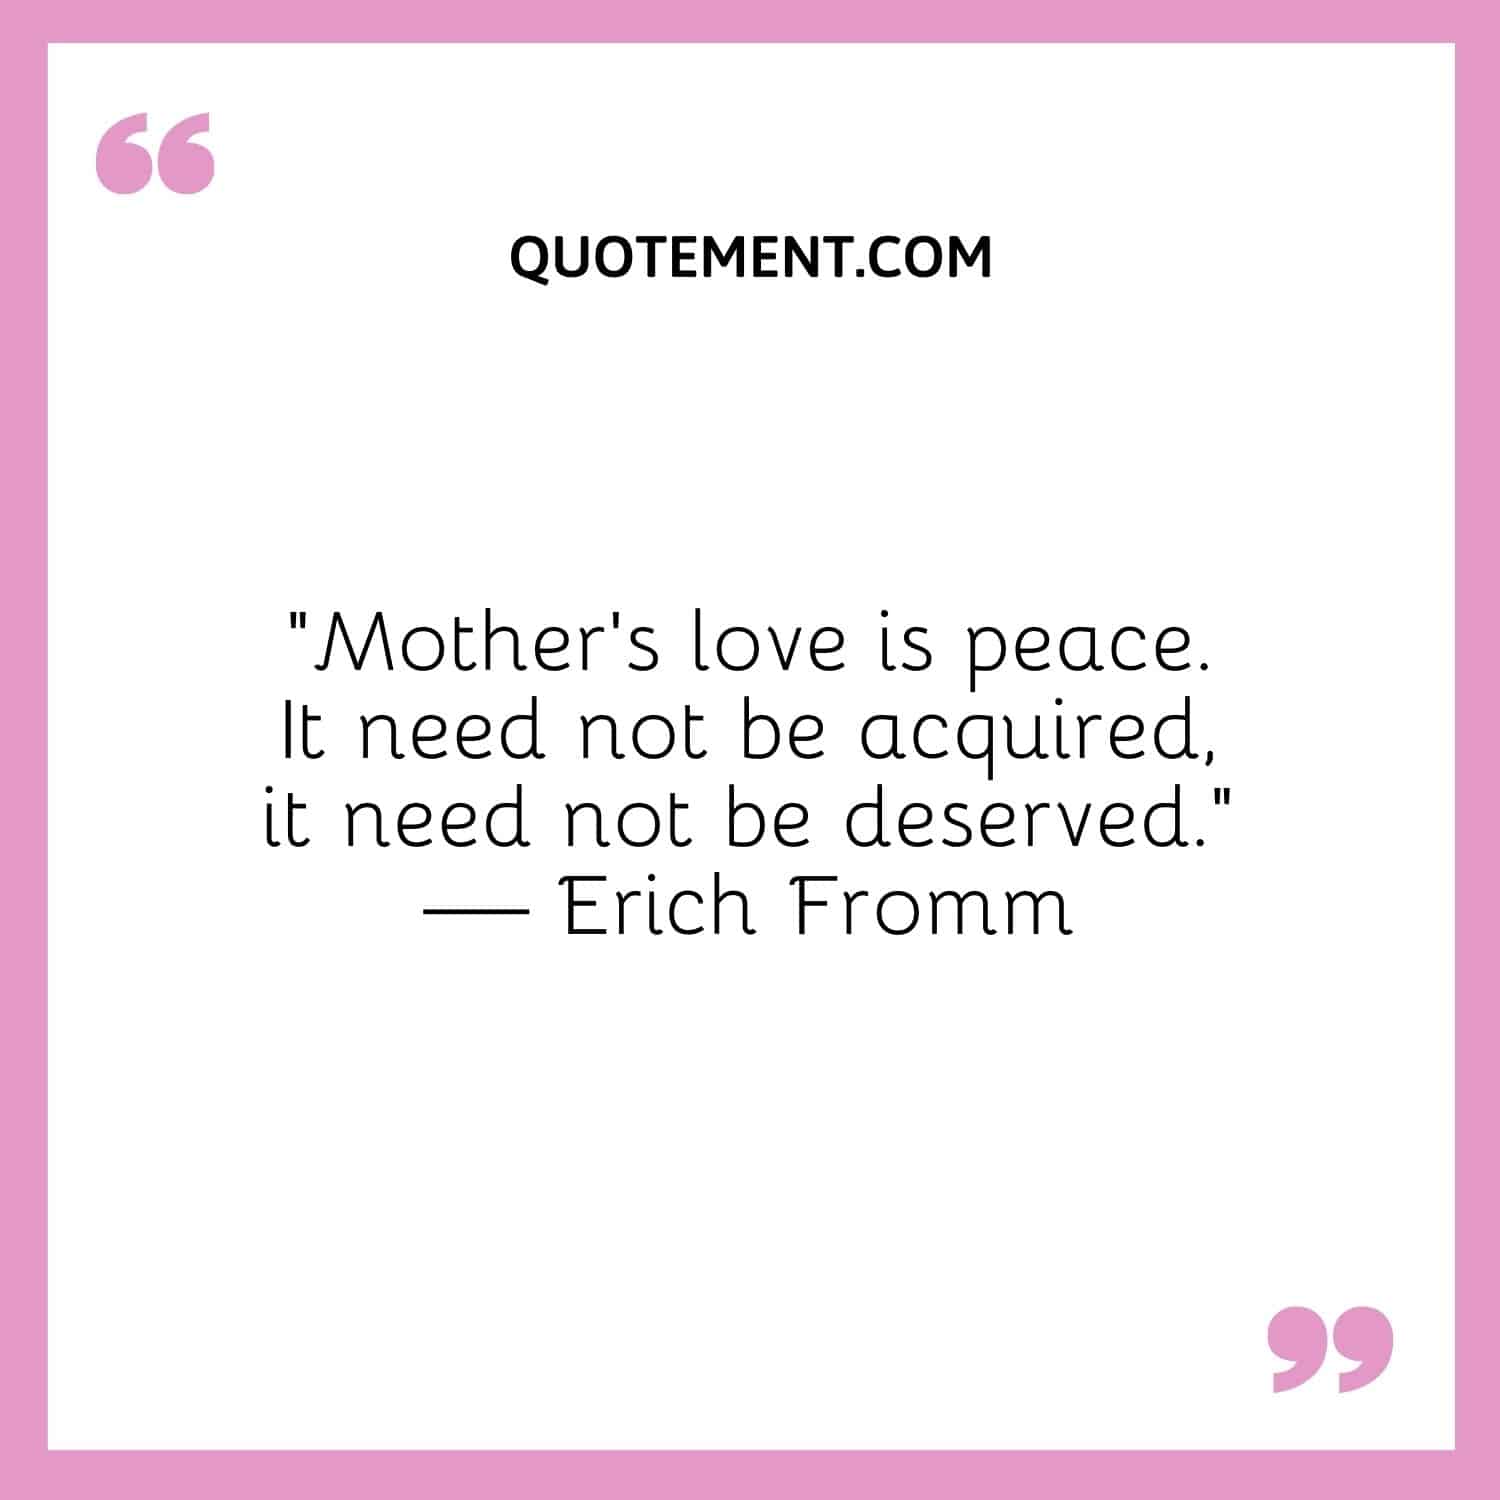 Mother’s love is peace. It need not be acquired, it need not be deserved